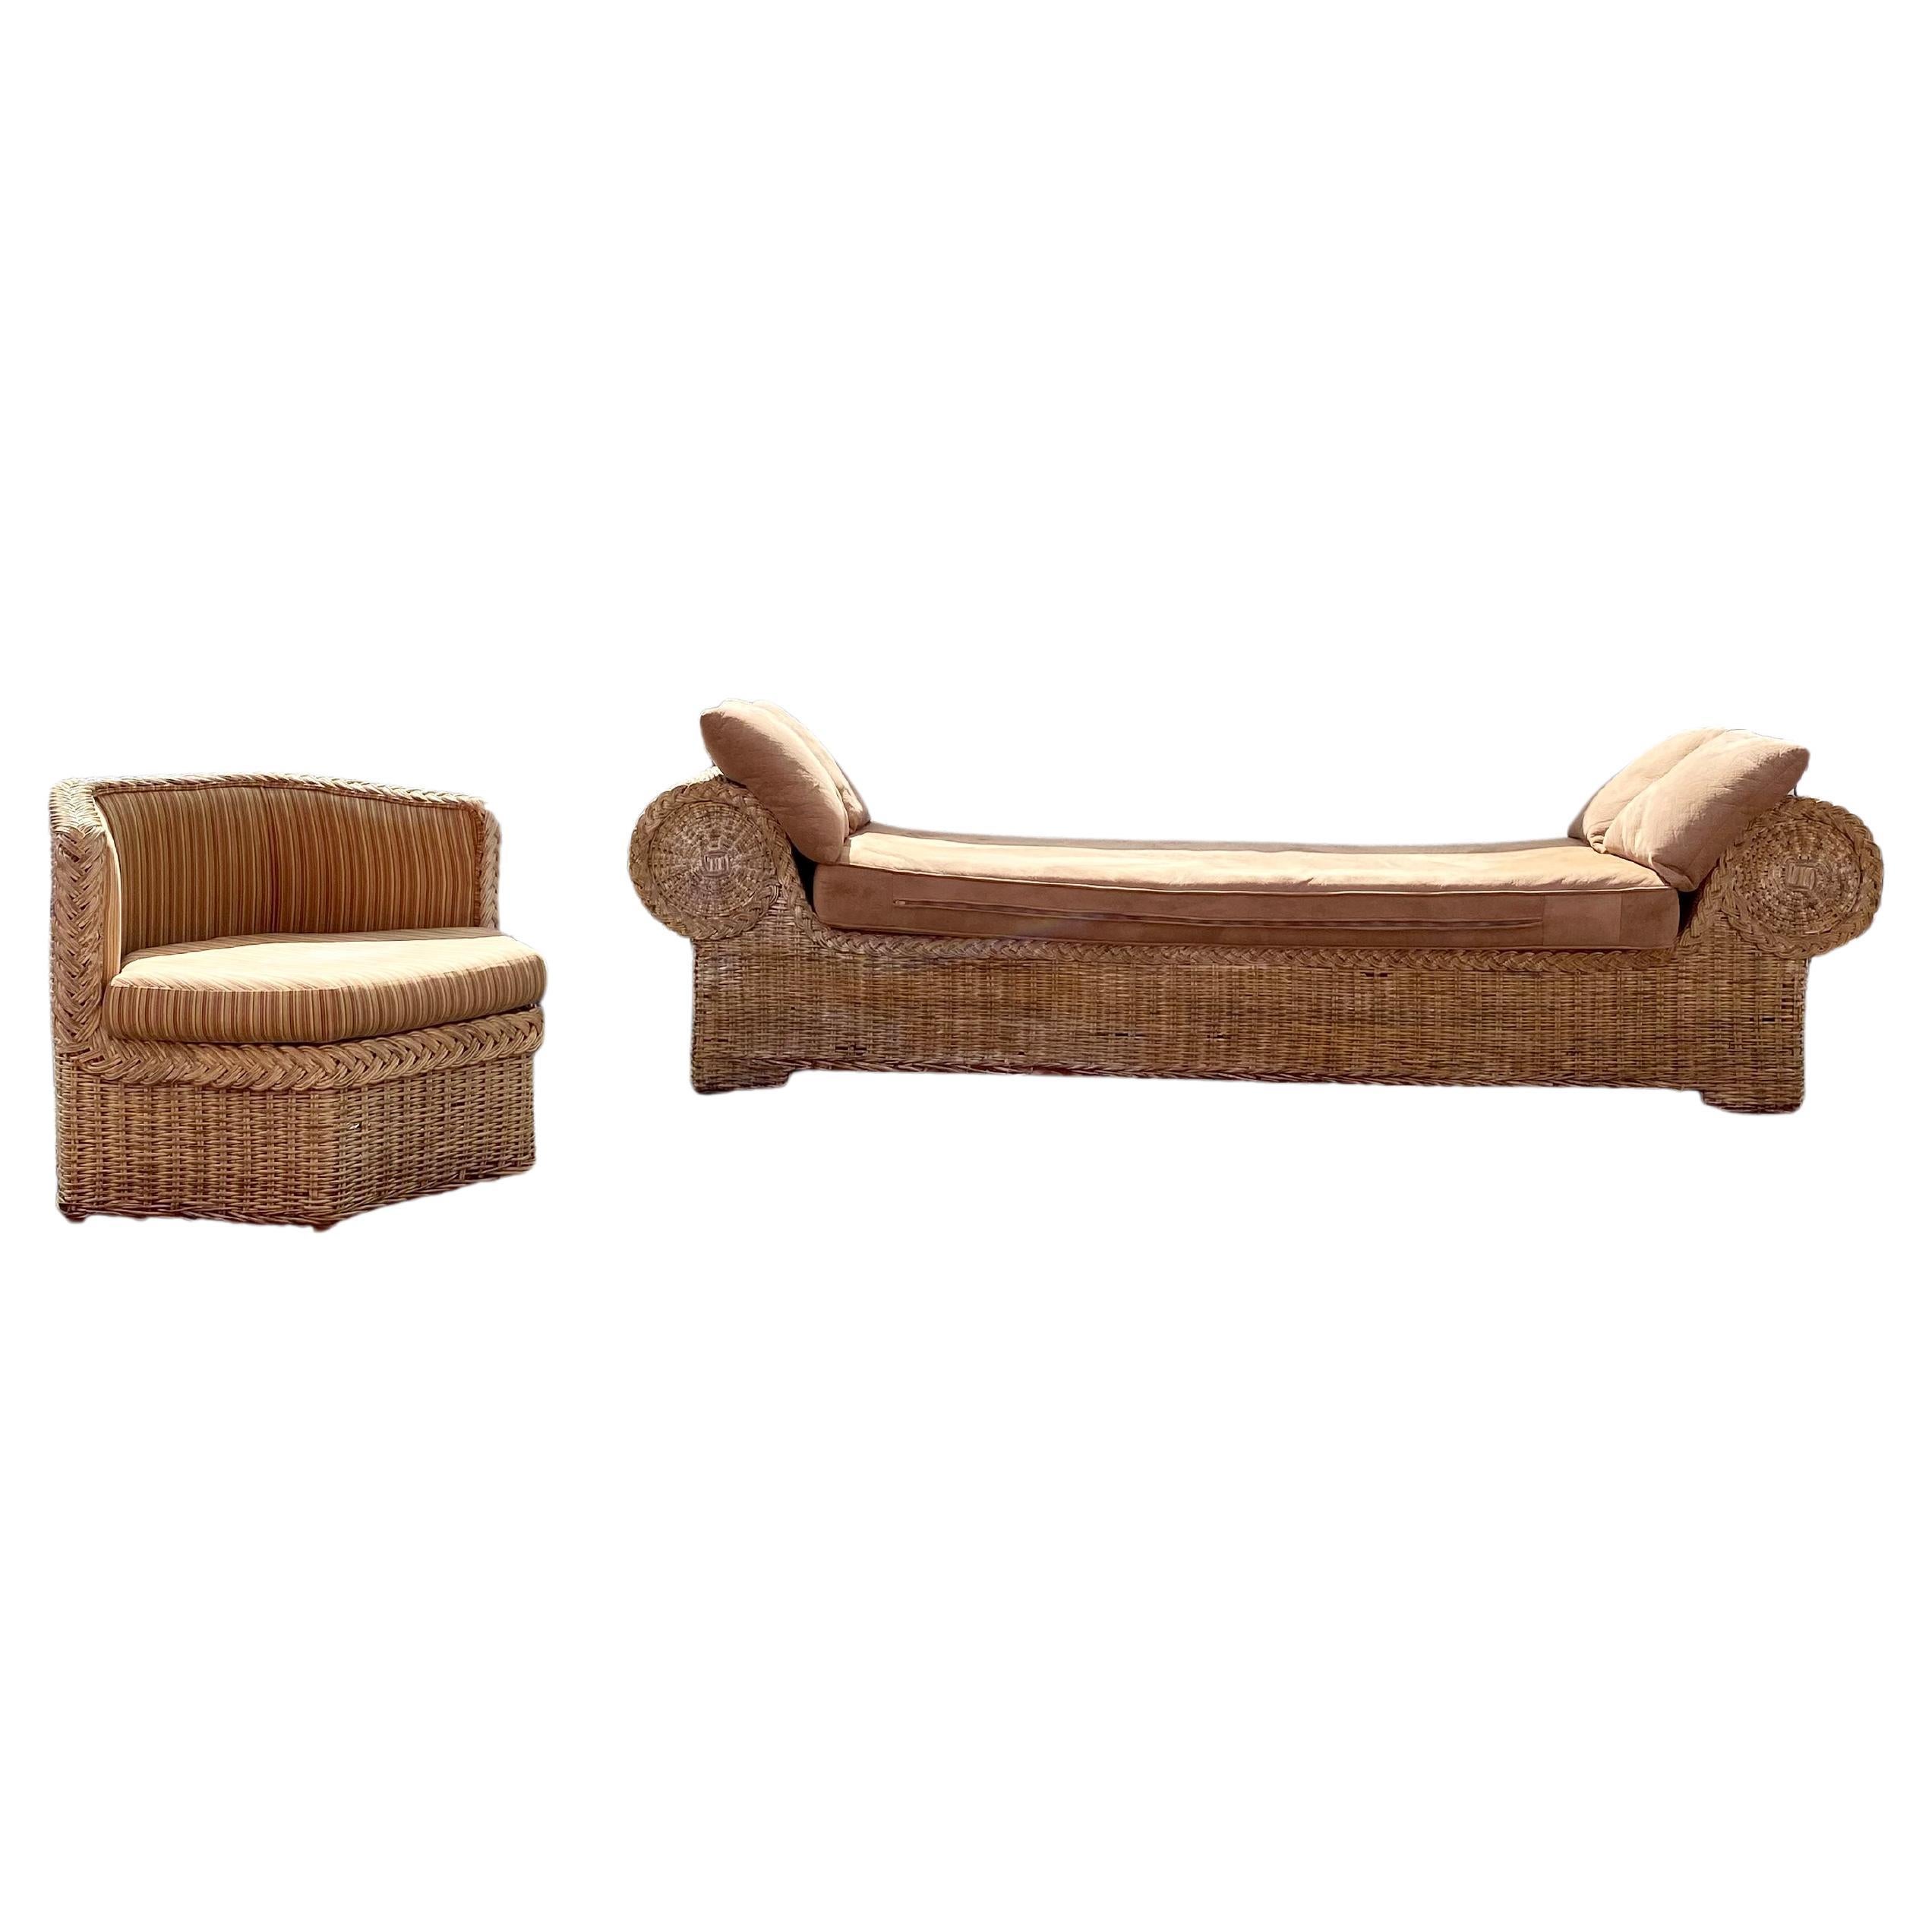 1970 Monumental Daybed and Chair en rotin, set of 2